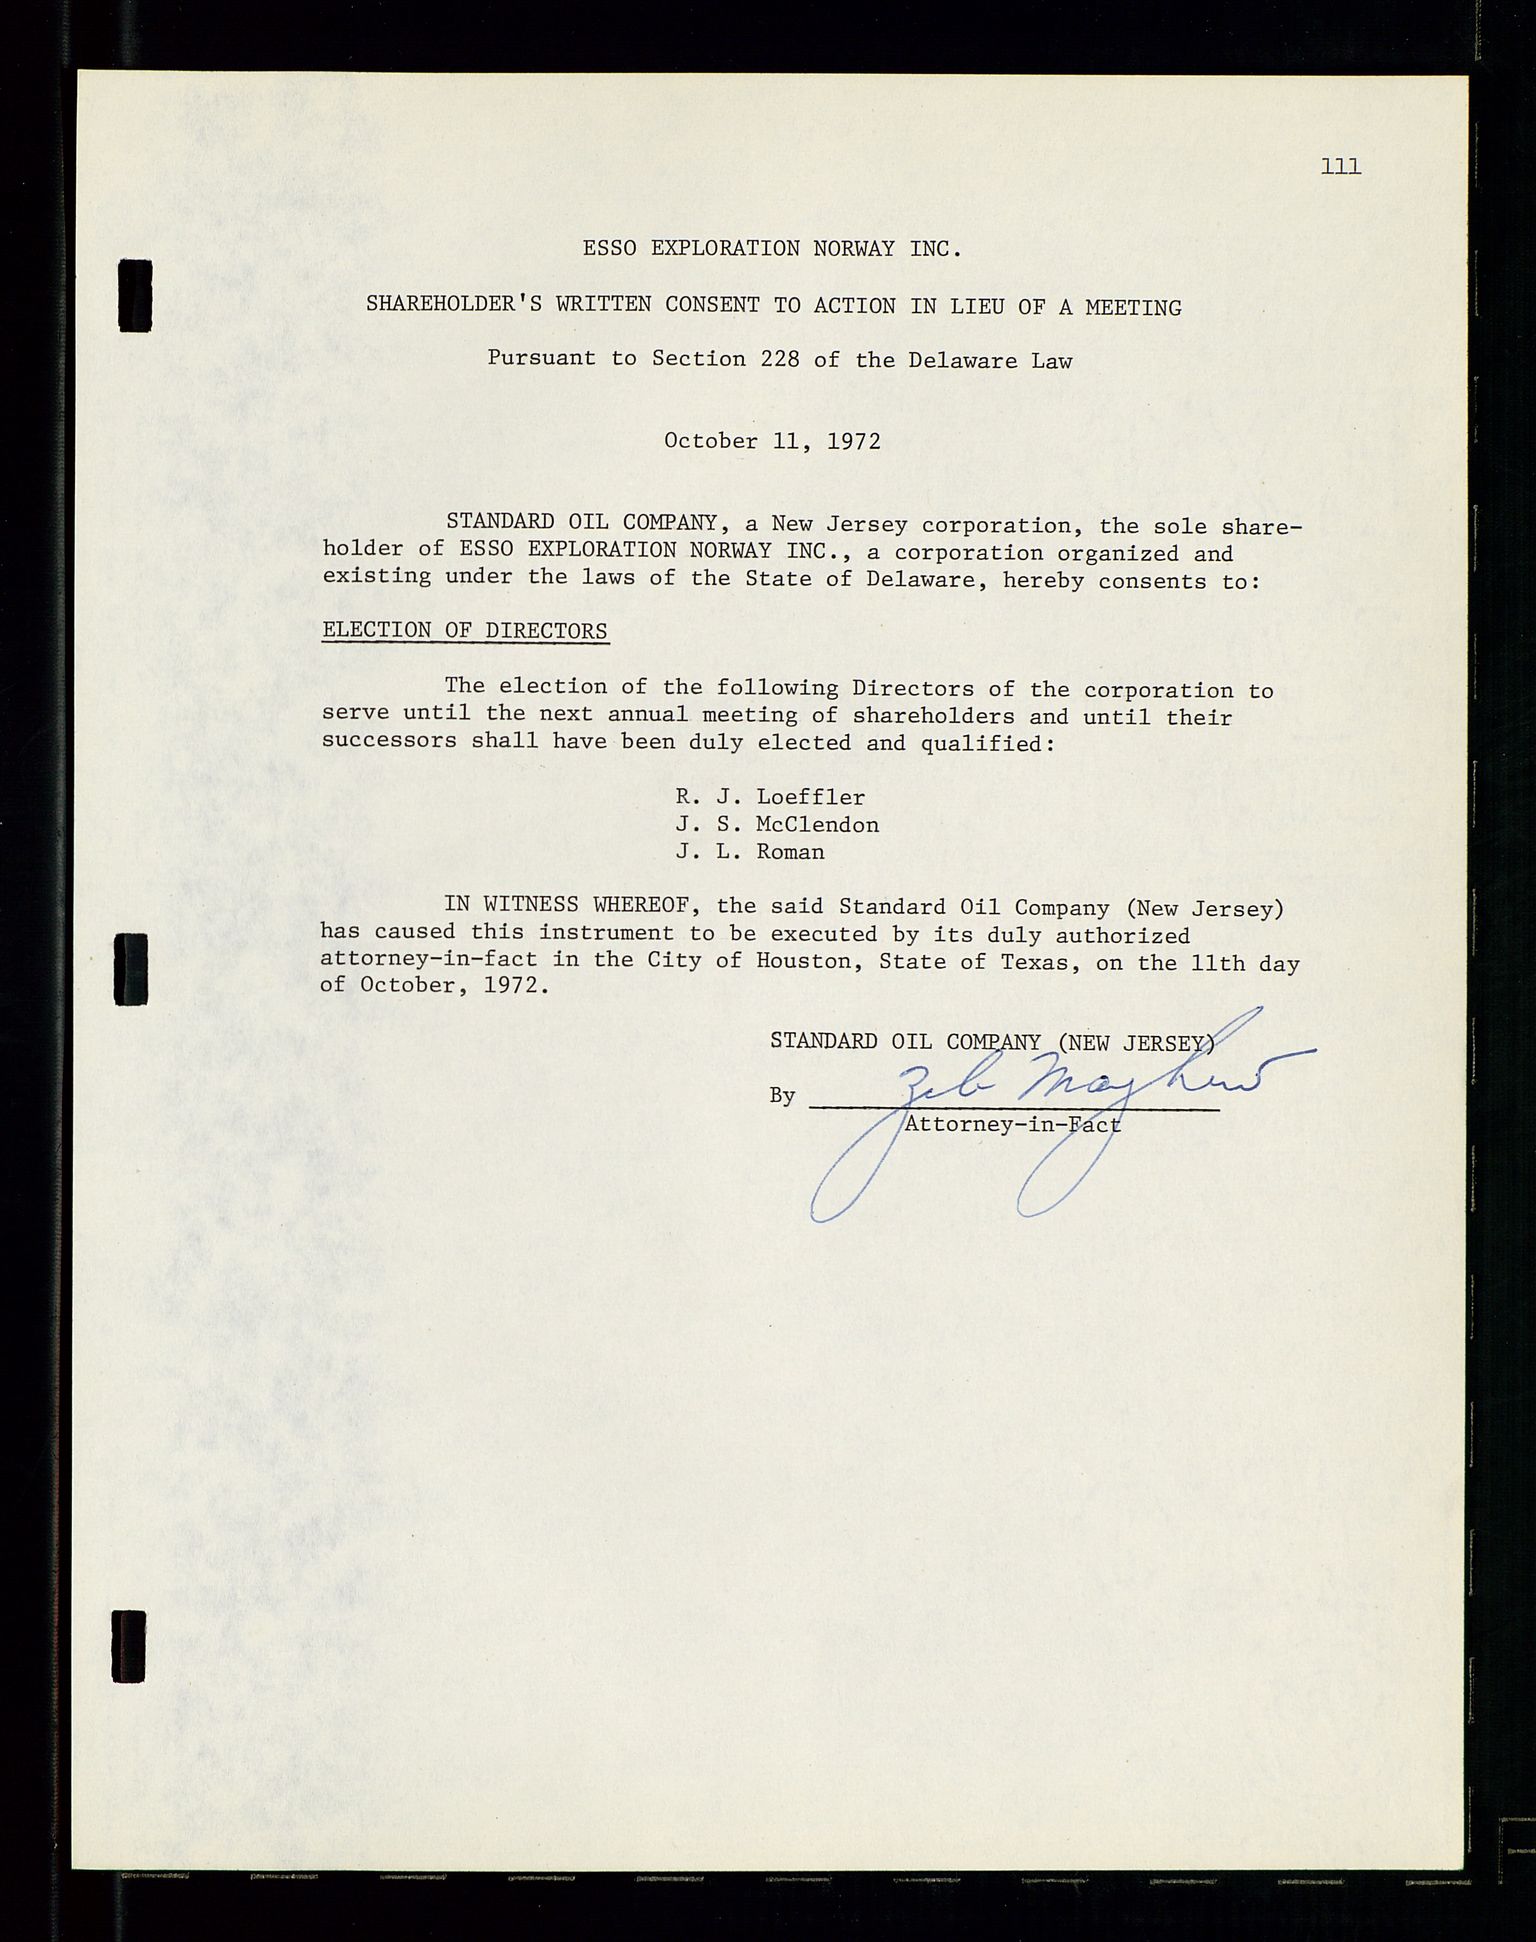 Pa 1512 - Esso Exploration and Production Norway Inc., SAST/A-101917/A/Aa/L0001/0001: Styredokumenter / Corporate records, By-Laws, Board meeting minutes, Incorporations, 1965-1975, p. 111